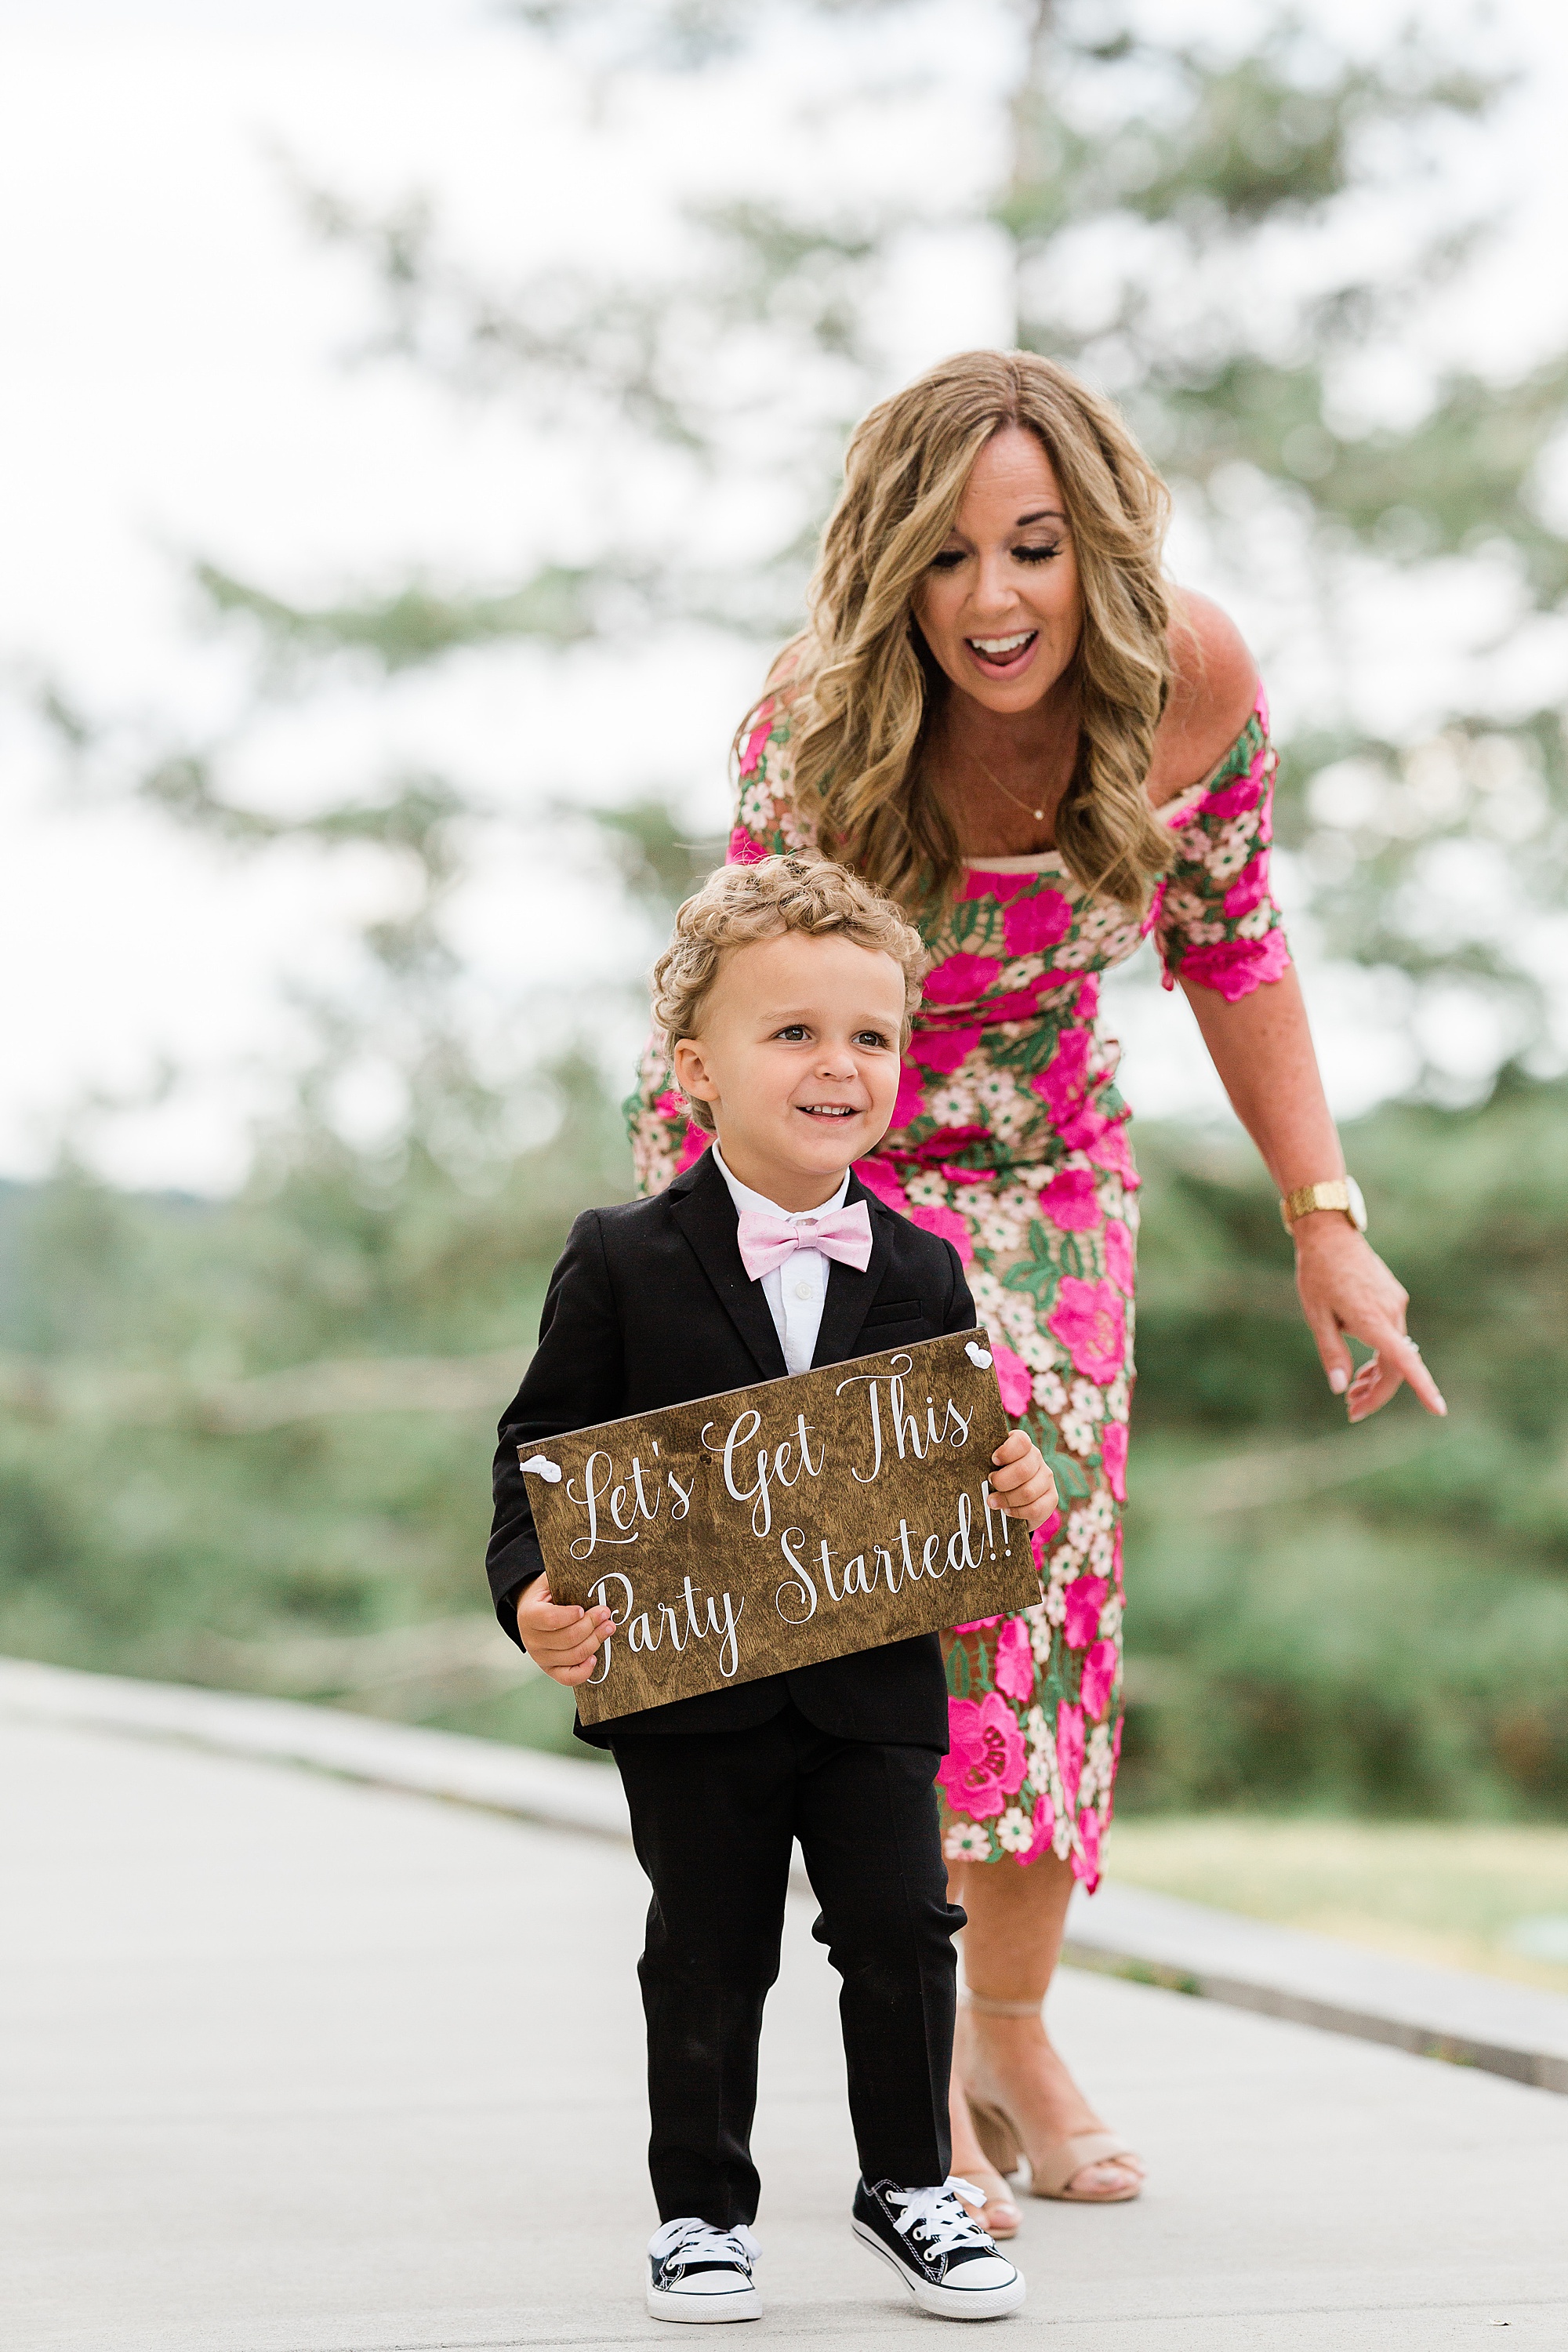 ring bearer with sign that says let's get this party started